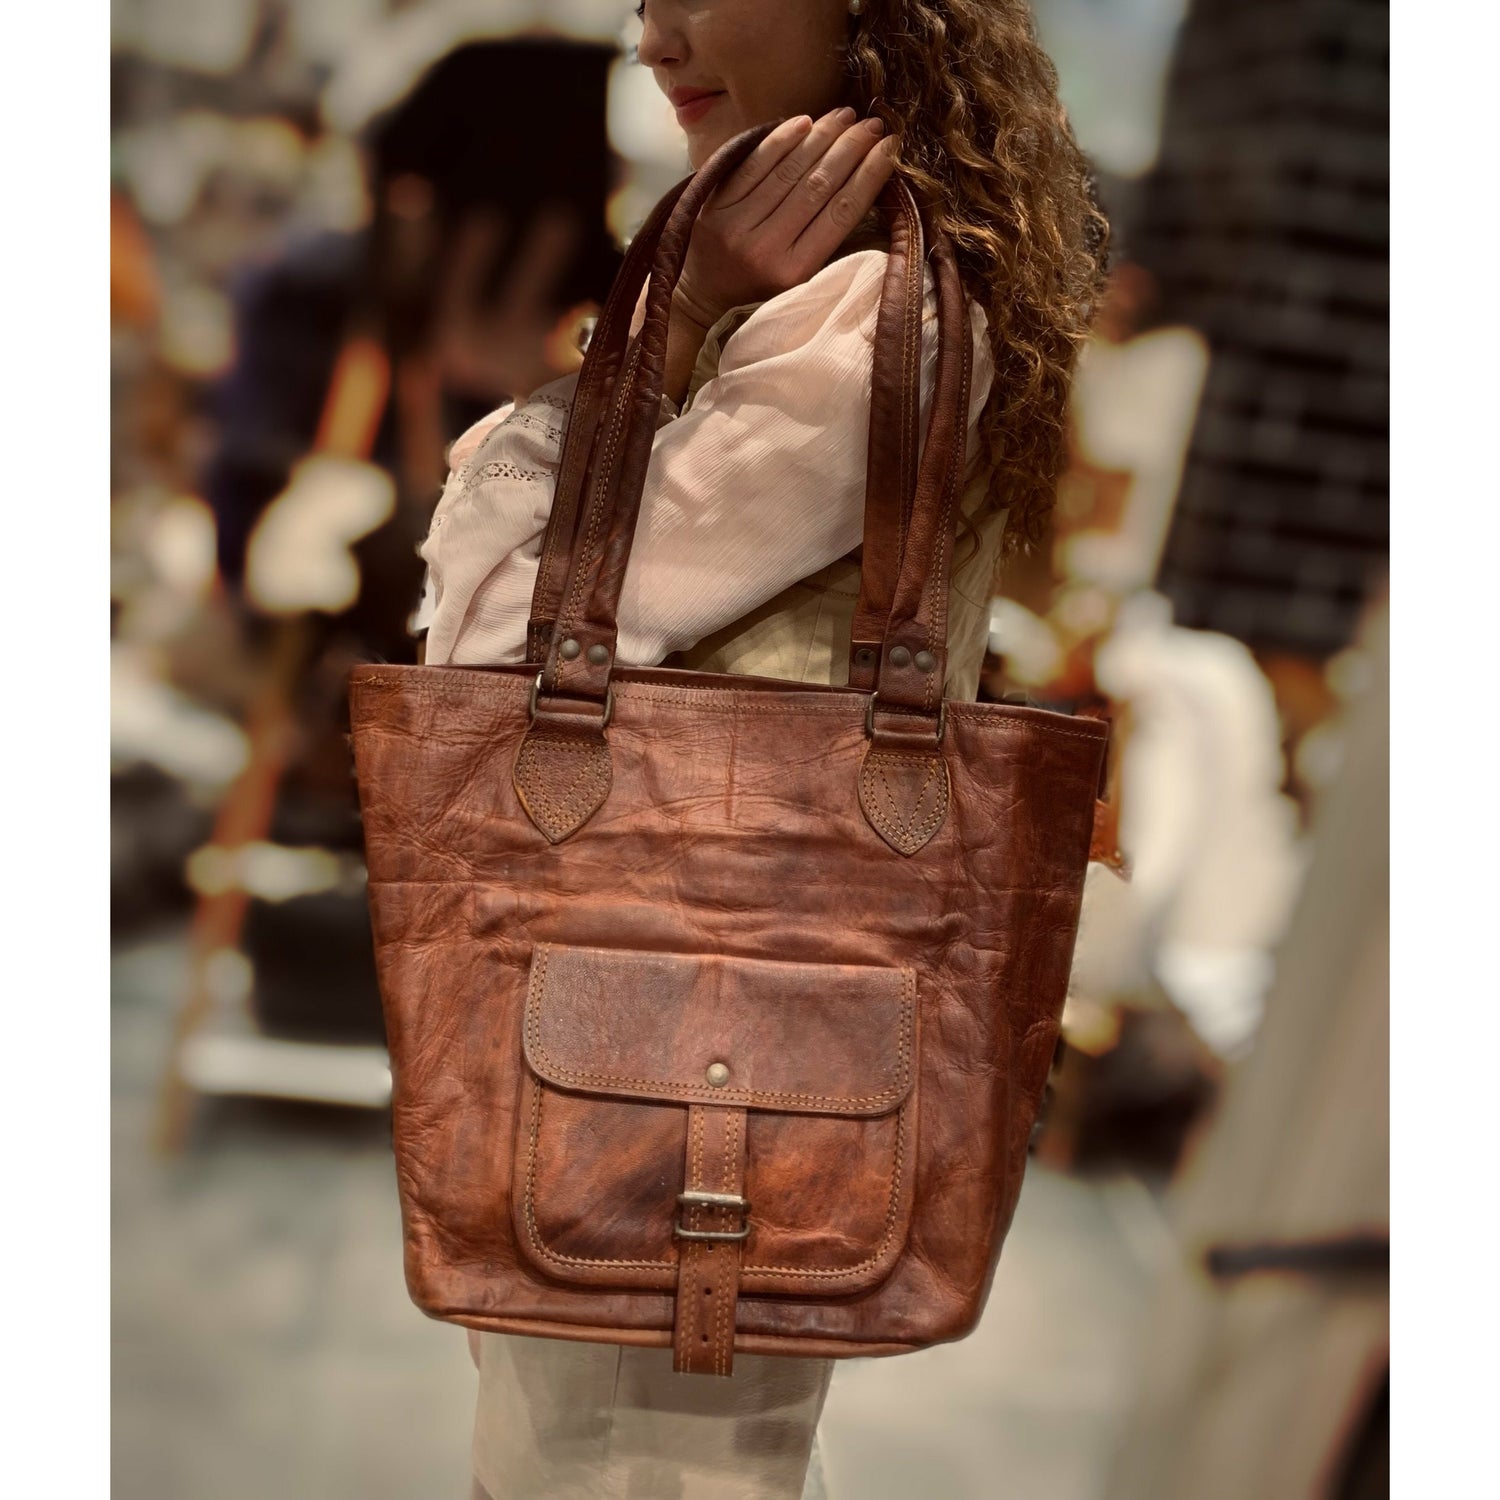 Leather Bucket Bag with front pocket 